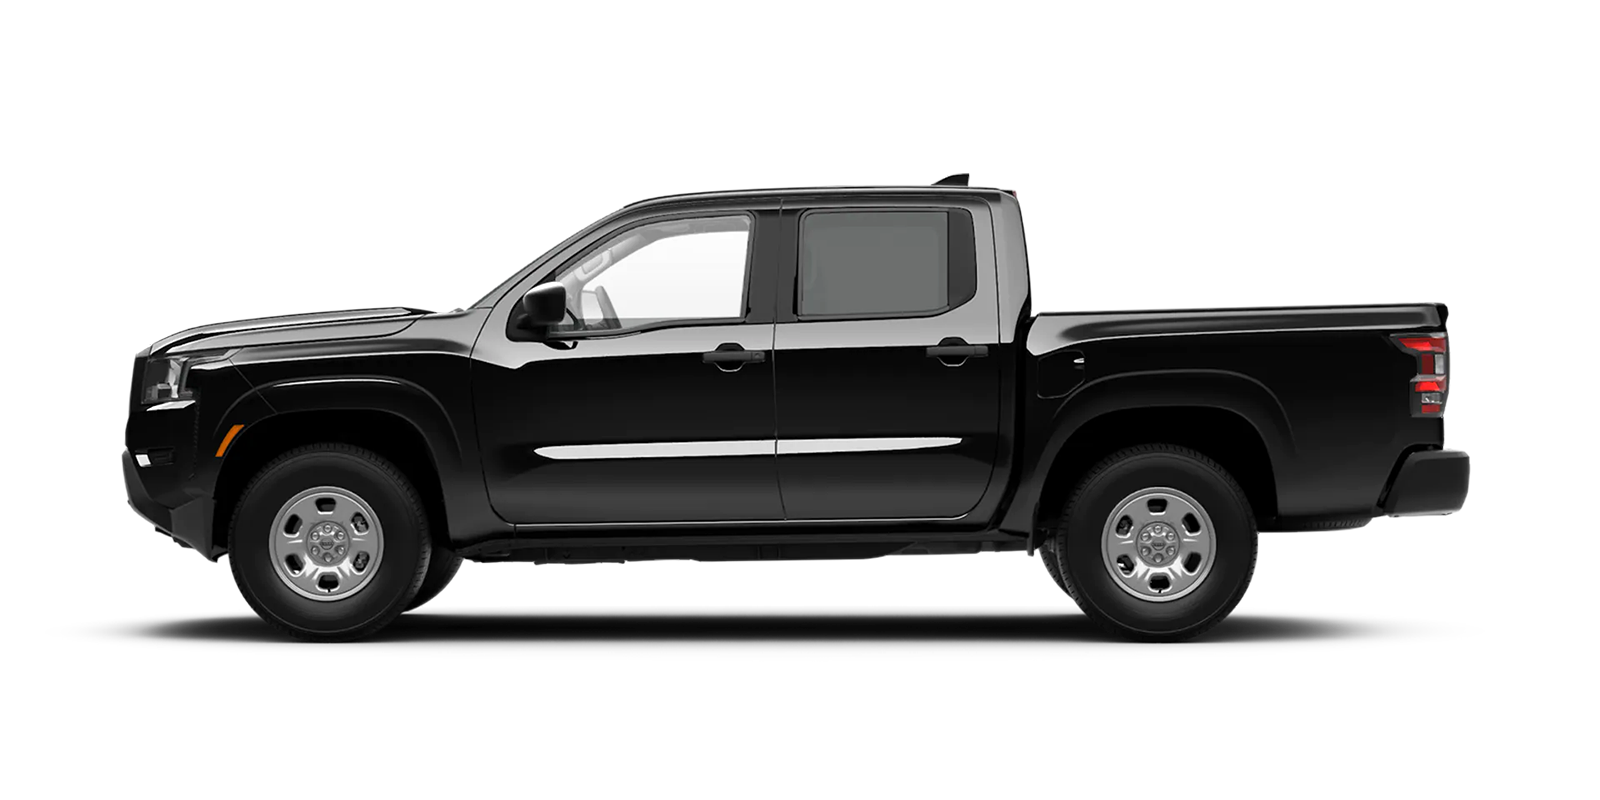 2022 Frontier Crew Cab S 4x4 in Super Black | Cherokee County Nissan in Holly Springs GA